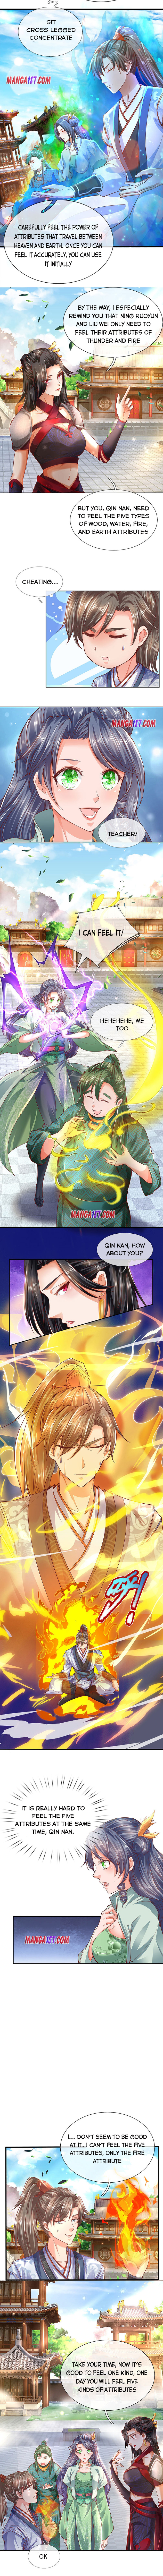 Marvelous Hero Of The Sword - Page 2